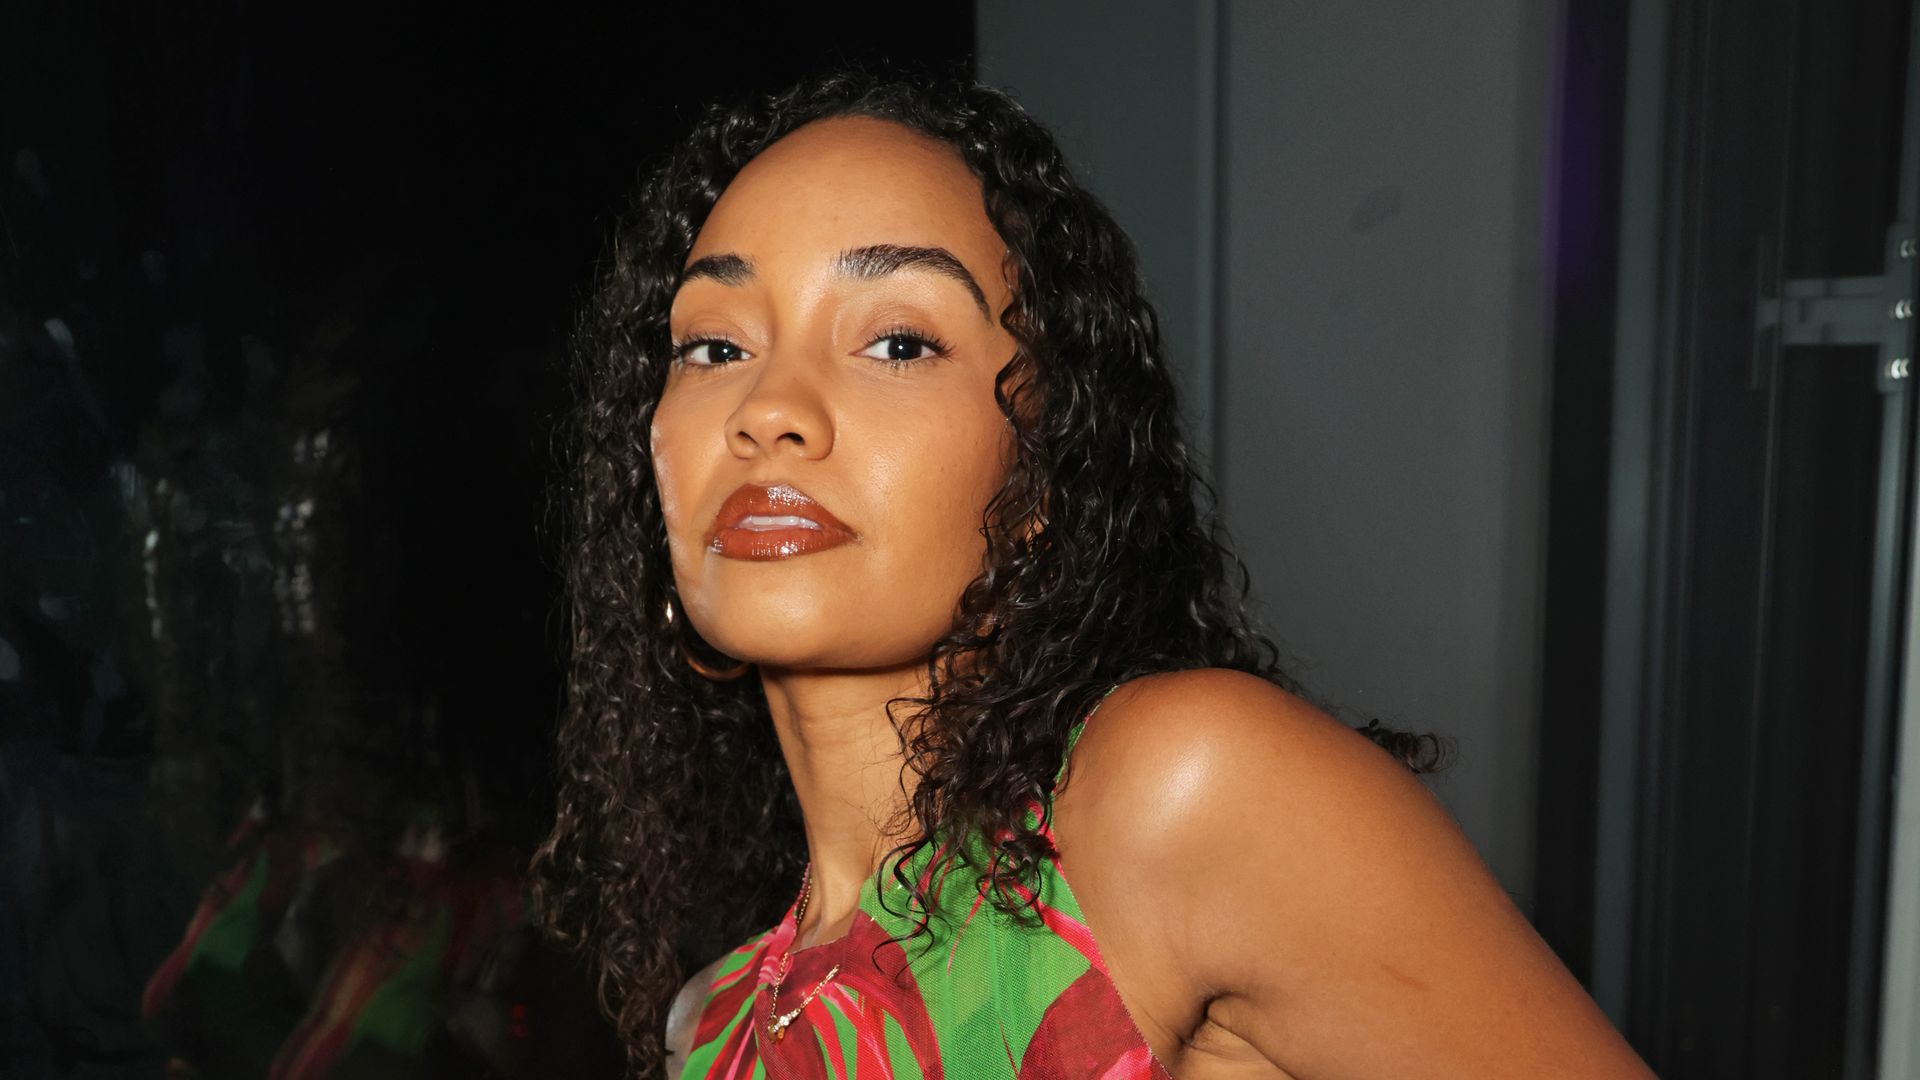 Leigh-Anne Pinnock rocks sheer tropical mini dress for unexpected reunion with Little Mix bandmate